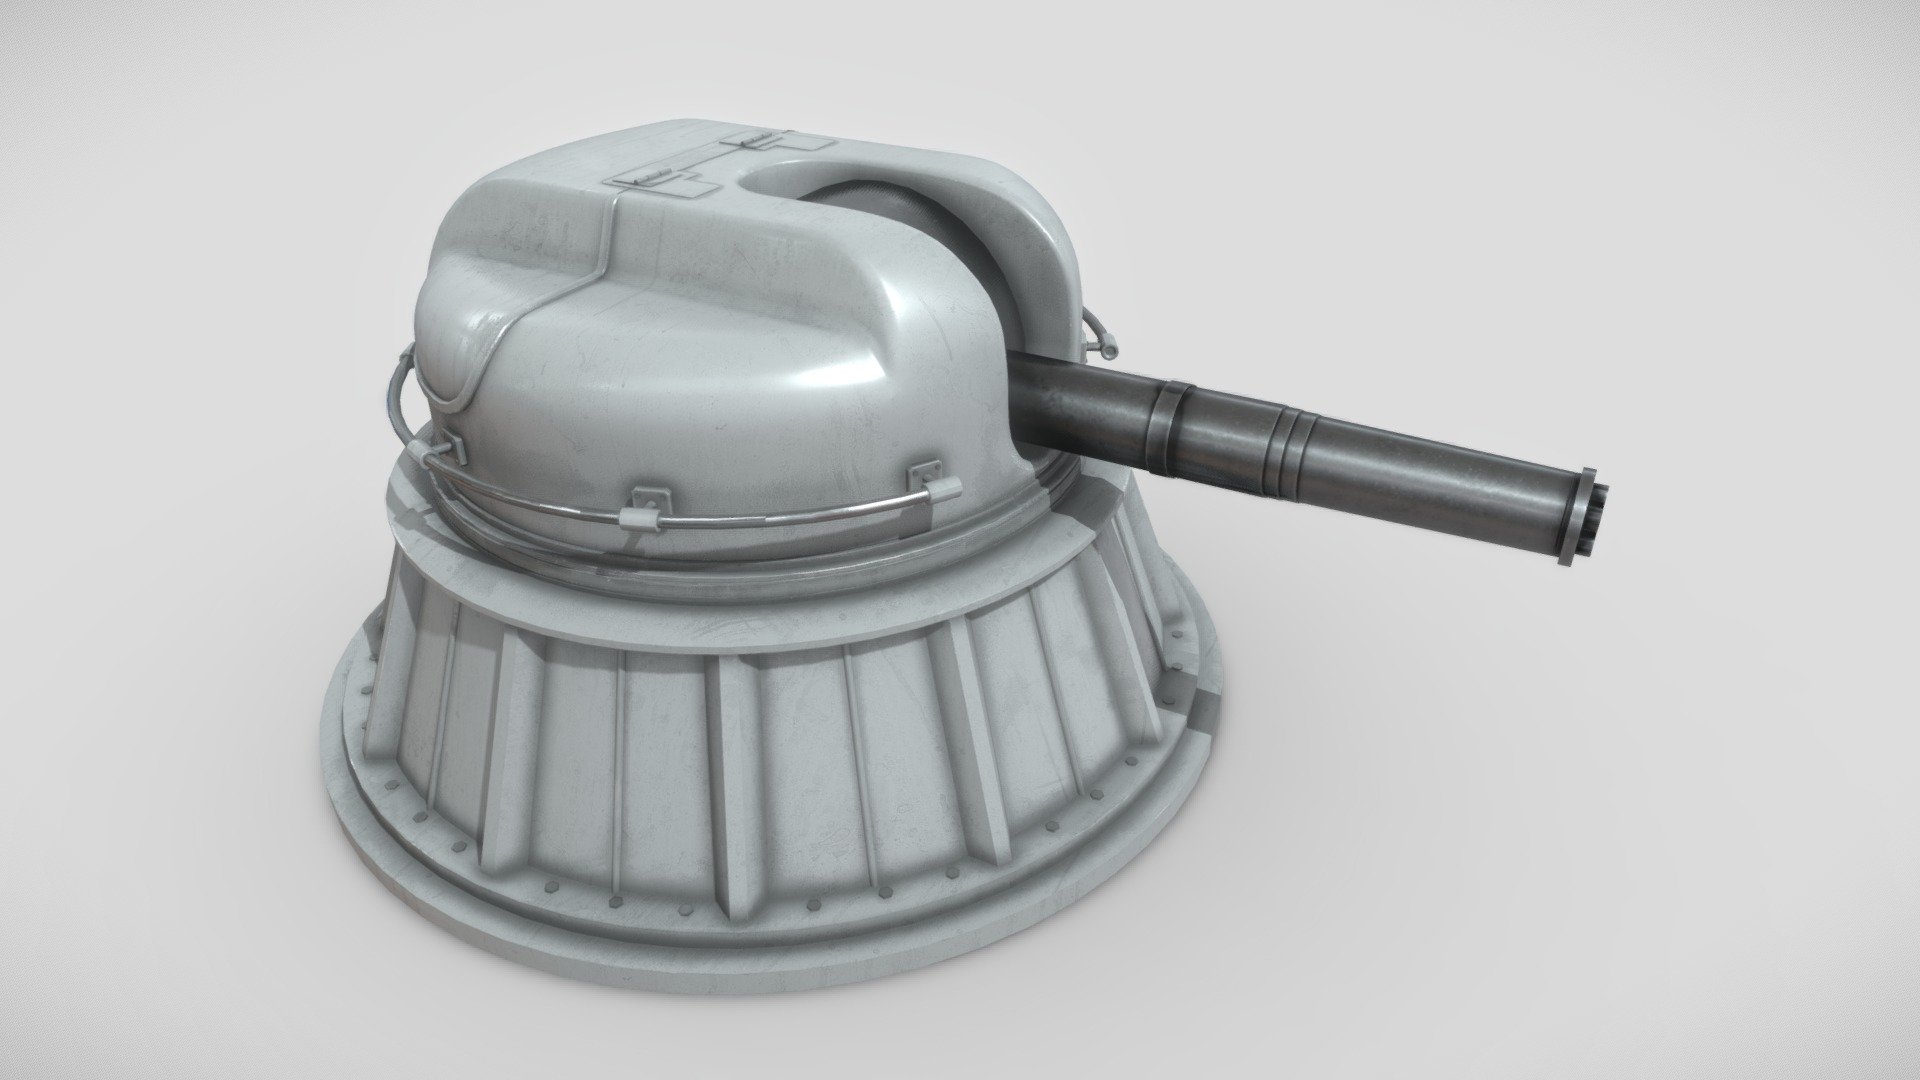 The Russian / Soviet close in weapon system is a fully automatic 30mm gatling gun.

This 3D model was created using 3ds Max, with textures designed in Substance Painter. The model has been meticulously unwrapped and divided into separate parts, enabling the base and turret to rotate seamlessly. If necessary, I am also capable of exporting the textures in various formats suitable for Unity, Unreal Engine, or V-Ray integration 3d model